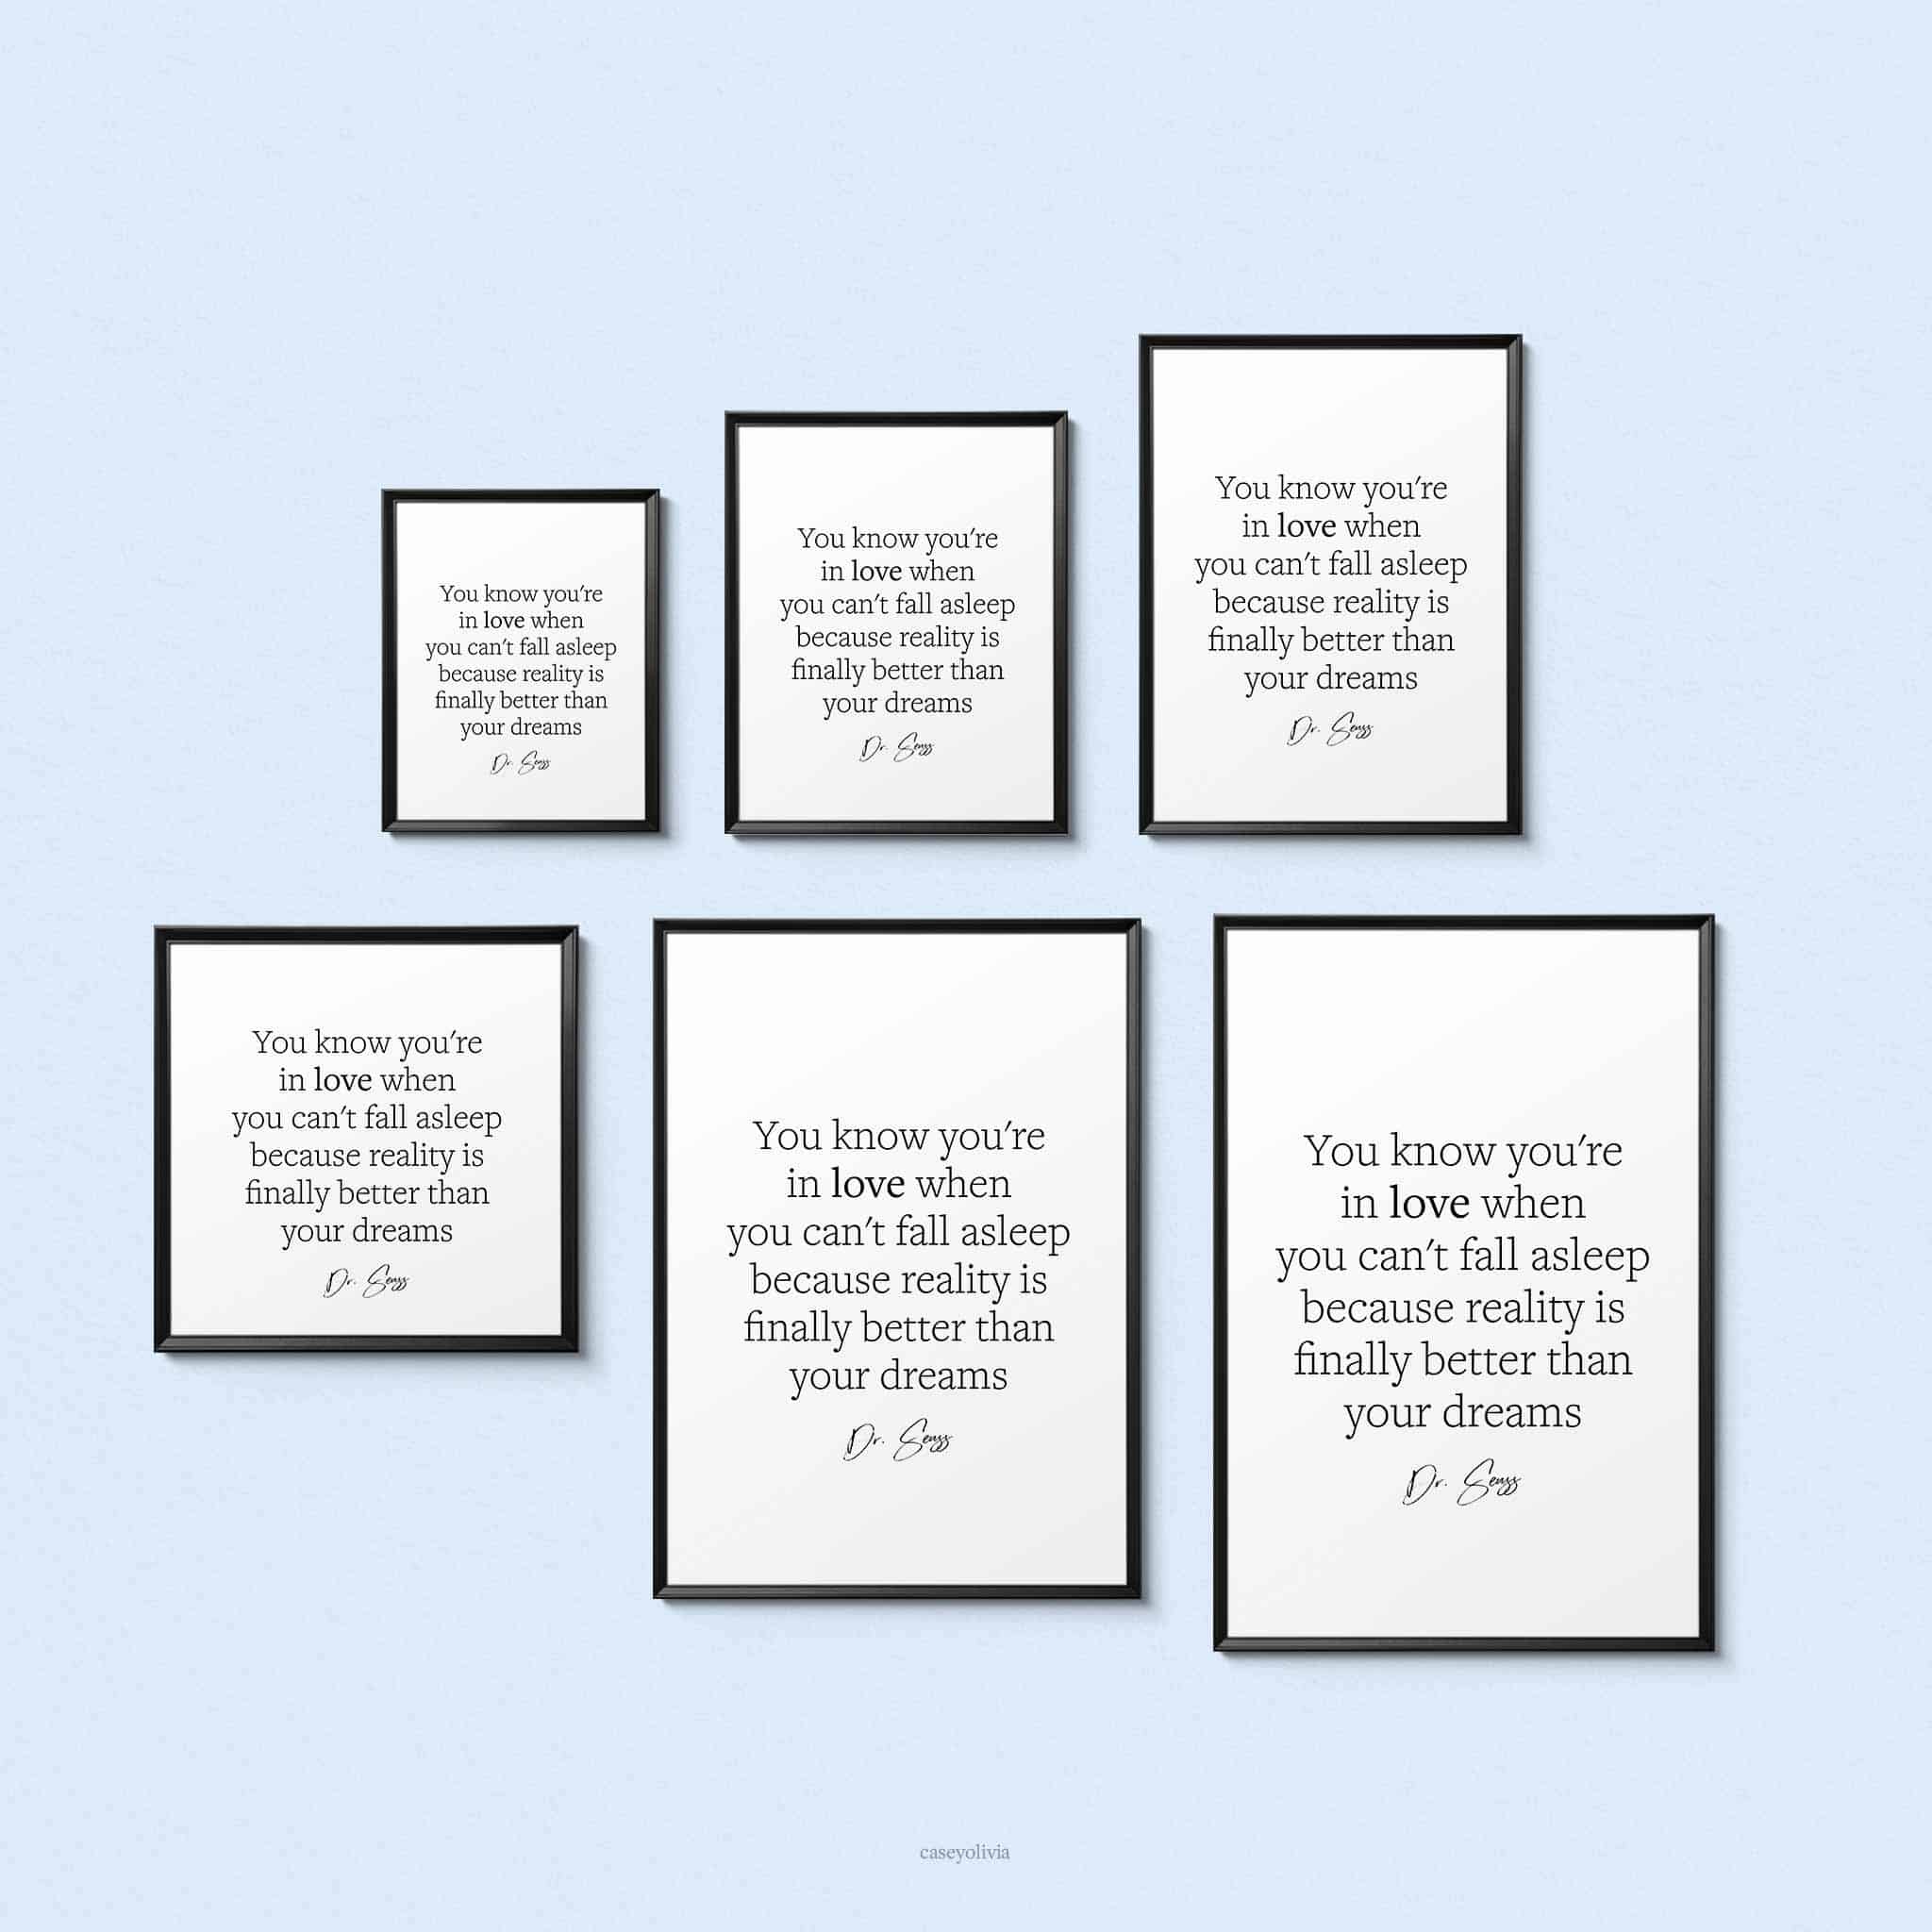 dr seuss famous quote printable wall art sizing options and ratios